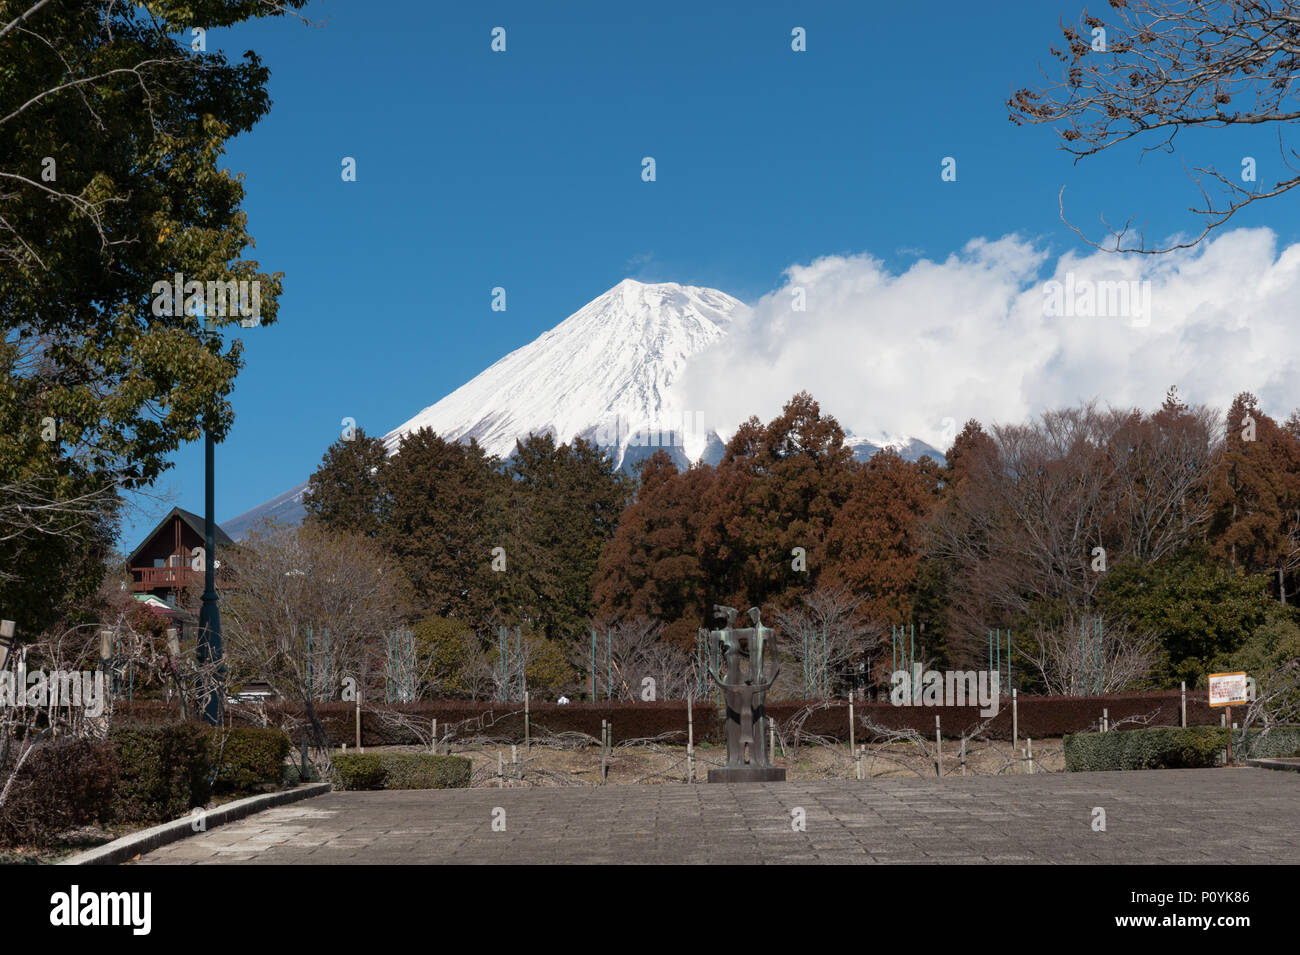 Shizuoka Prefecture, Fuji City, Hiromi Park, Japan - February 16, 2013. Beautiful view of Mount Fuji in winter with blue sky and white clouds. Stock Photo